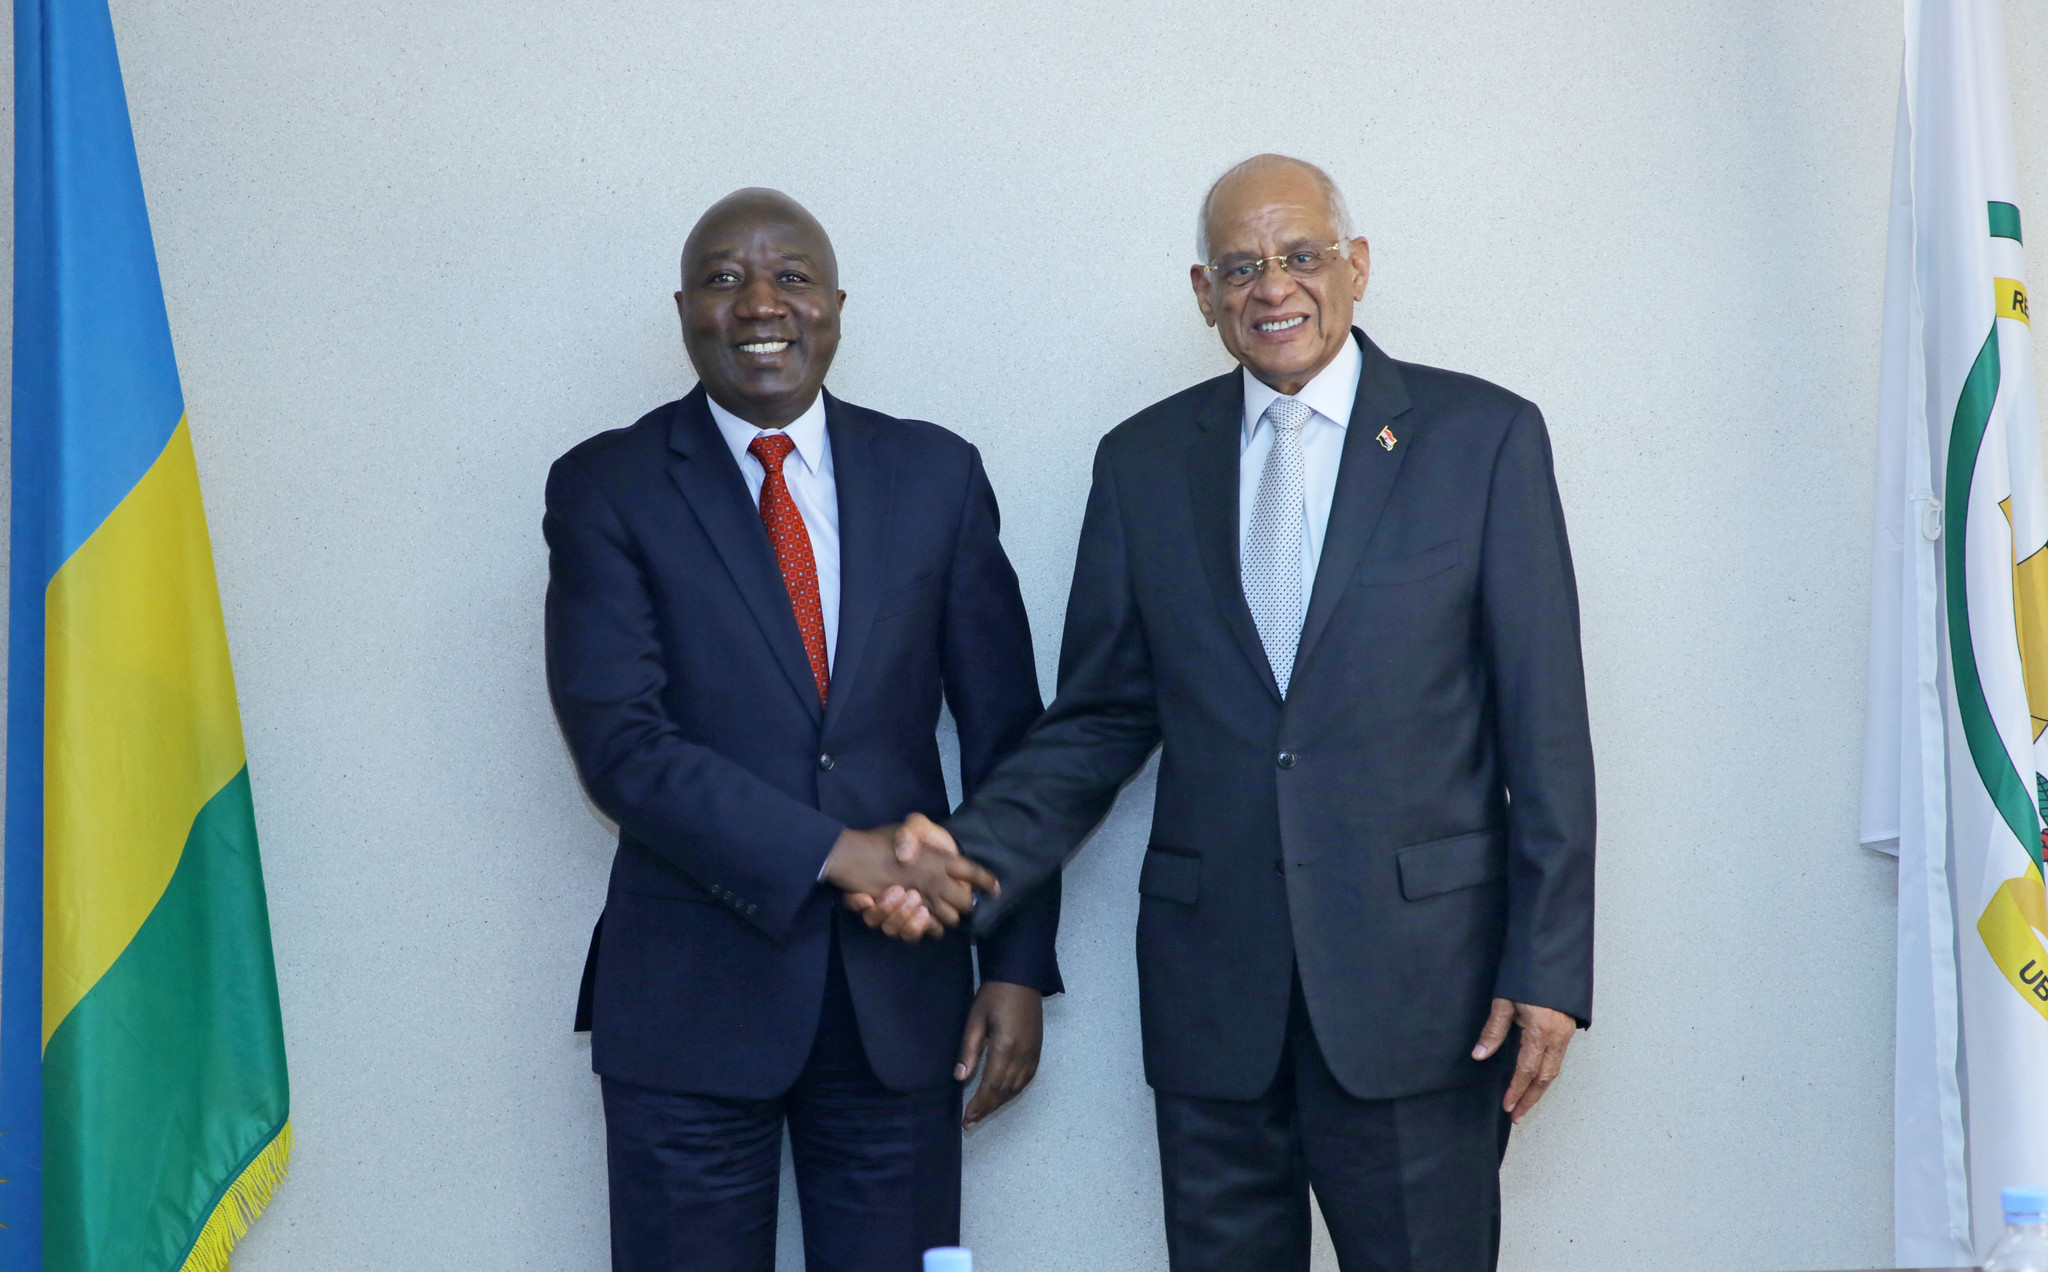 Prime Minister Dr. Edouard Ngirente receives the Speaker of the House of Representatives of Egypt Dr. Ali Abdel Aal in Kigali on July 25th, 2019. / Courtesy